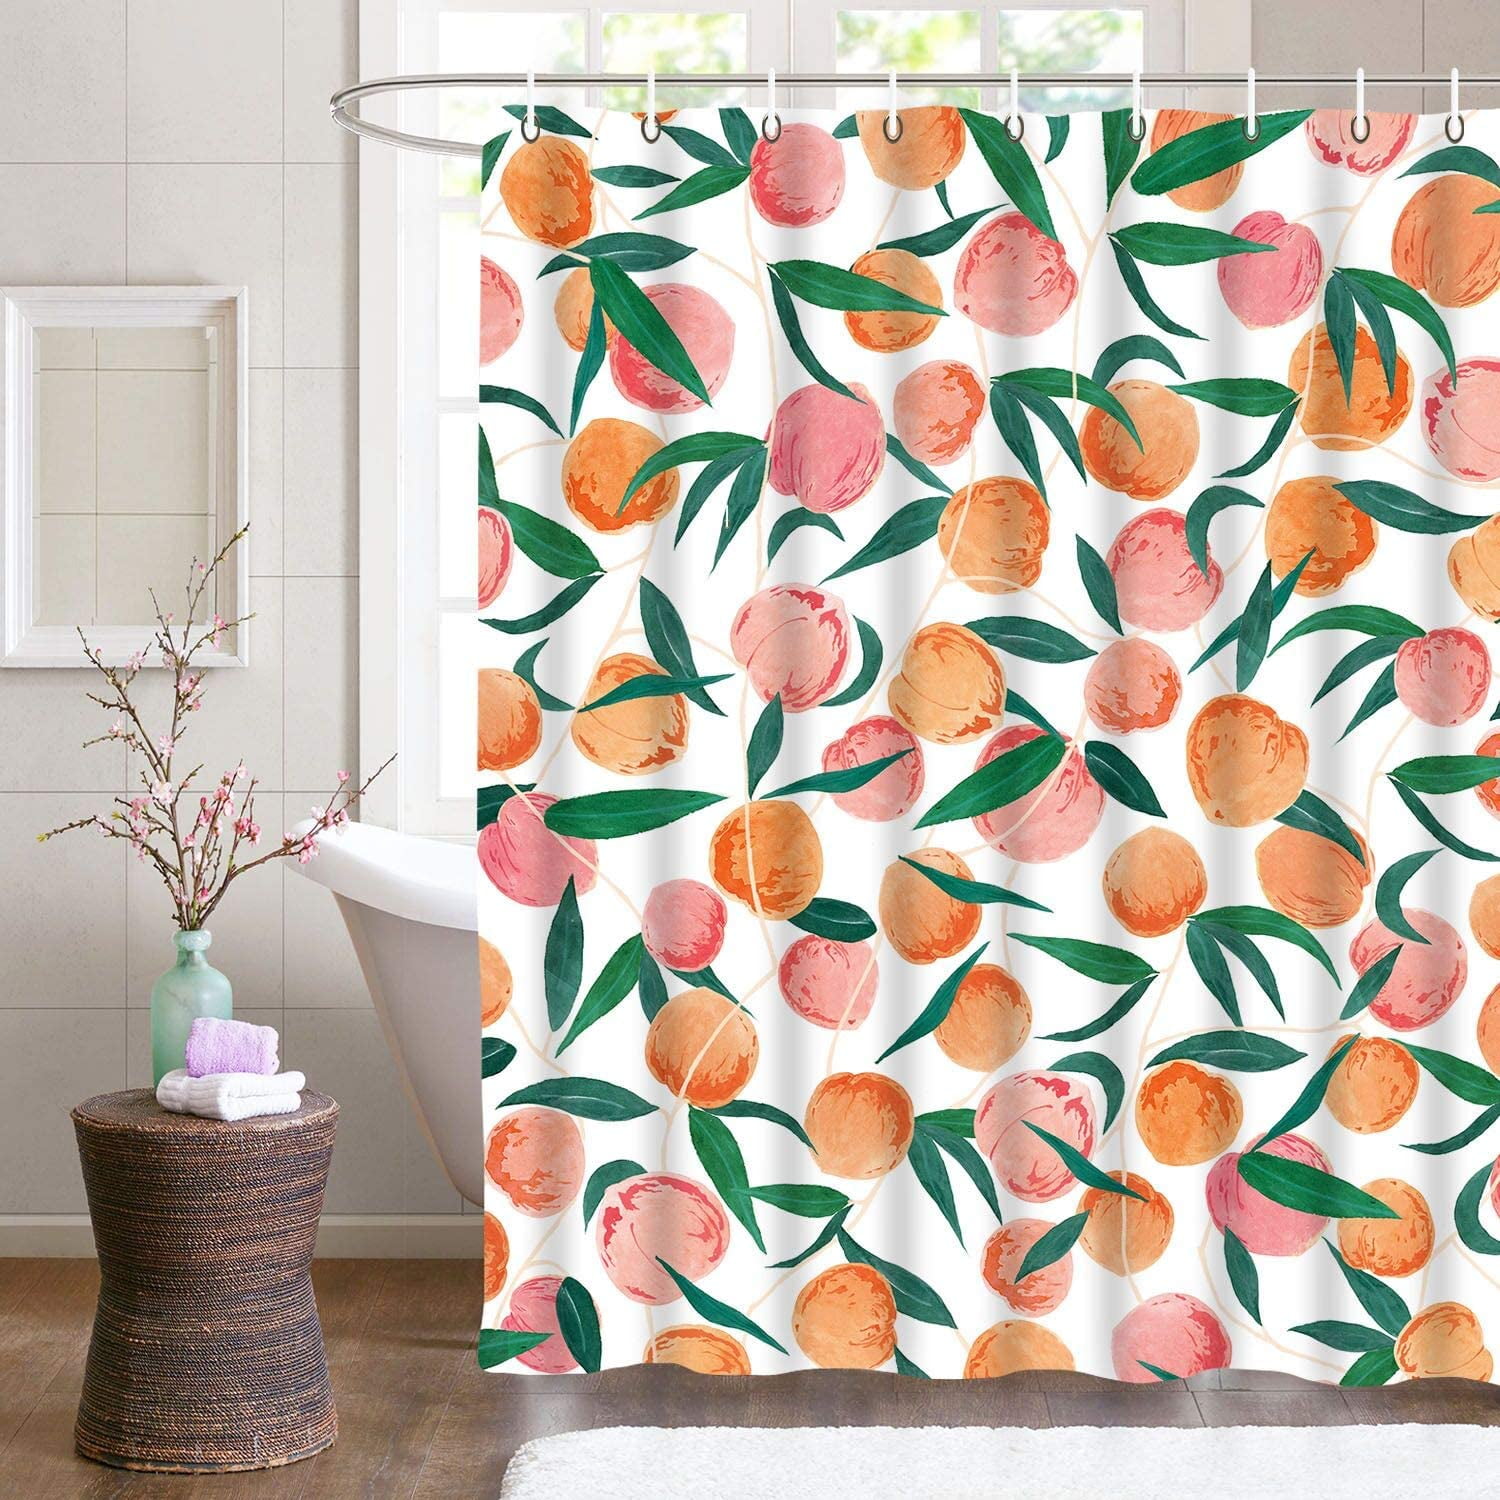 Details about   Autumn Fruit Peaches Water Bubbles Waterproof Polyester Shower Curtain Set 72" 